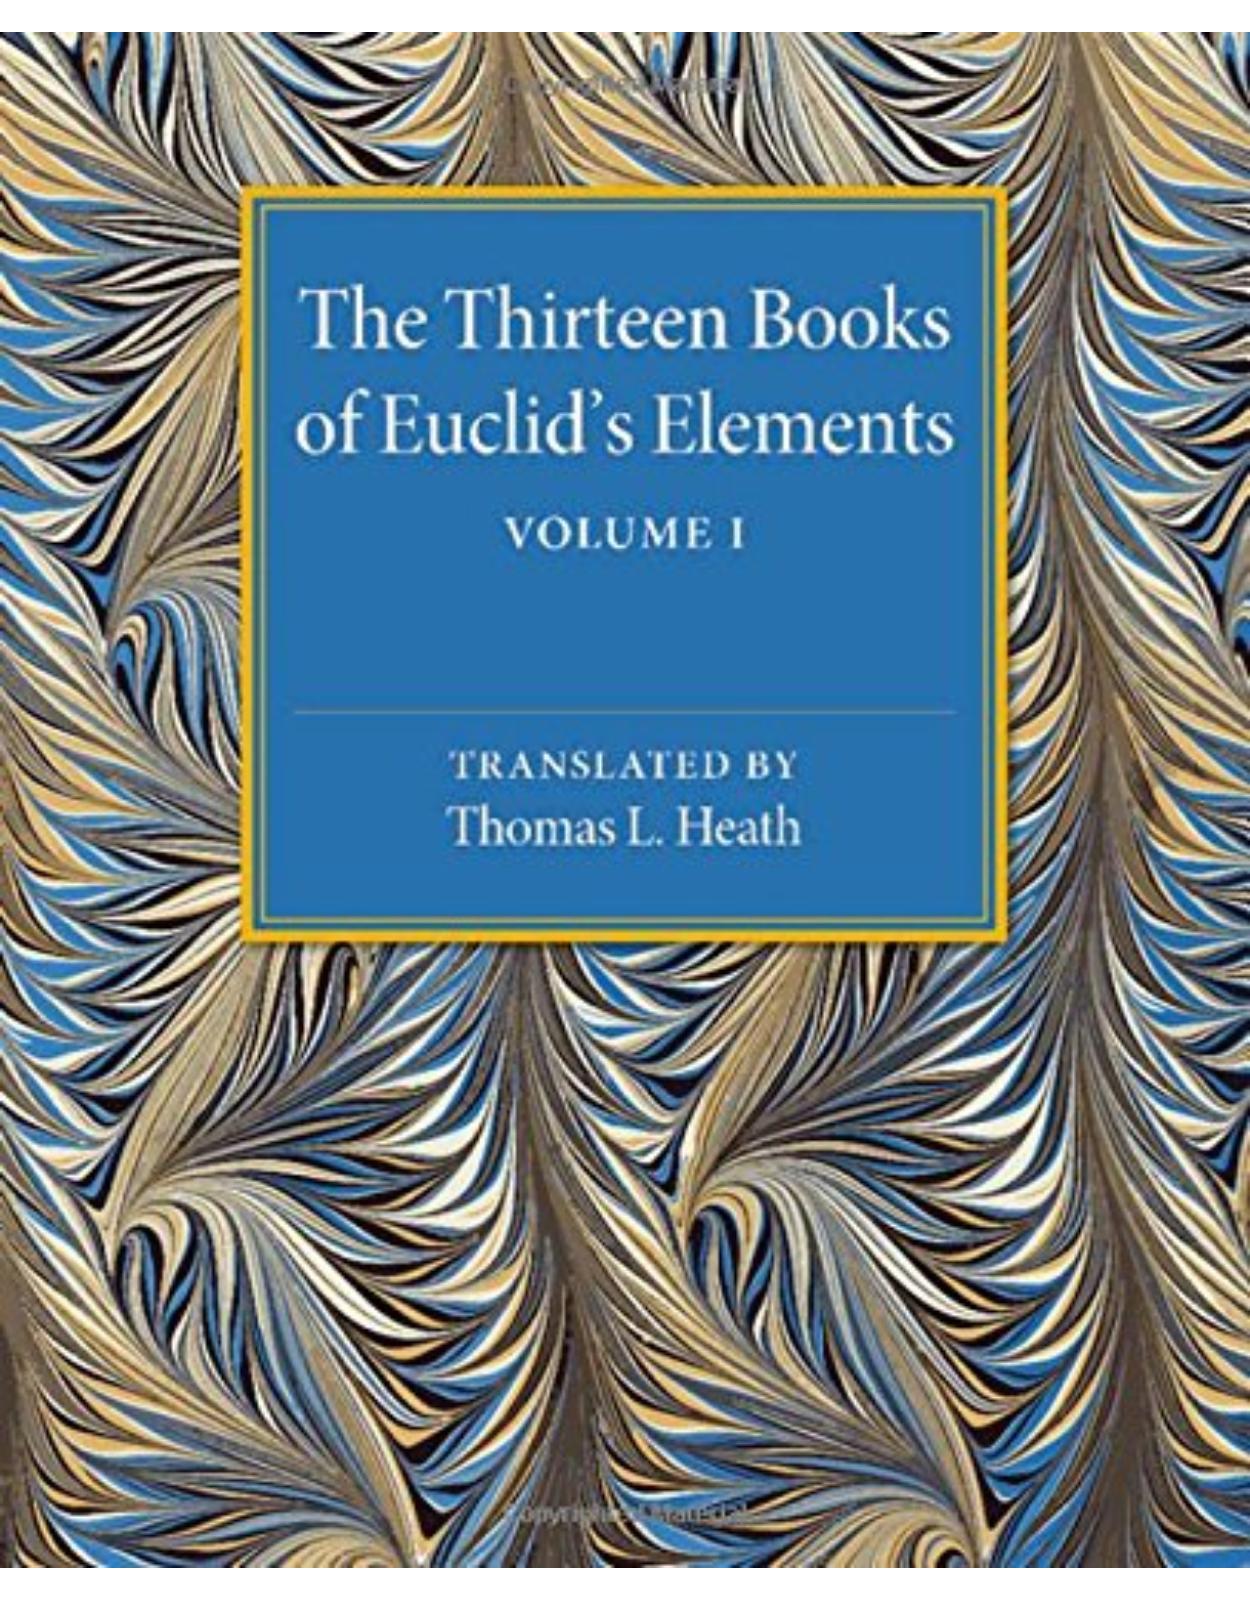 The Thirteen Books of Euclid's Elements: Volume 1, Introduction and Books I, II